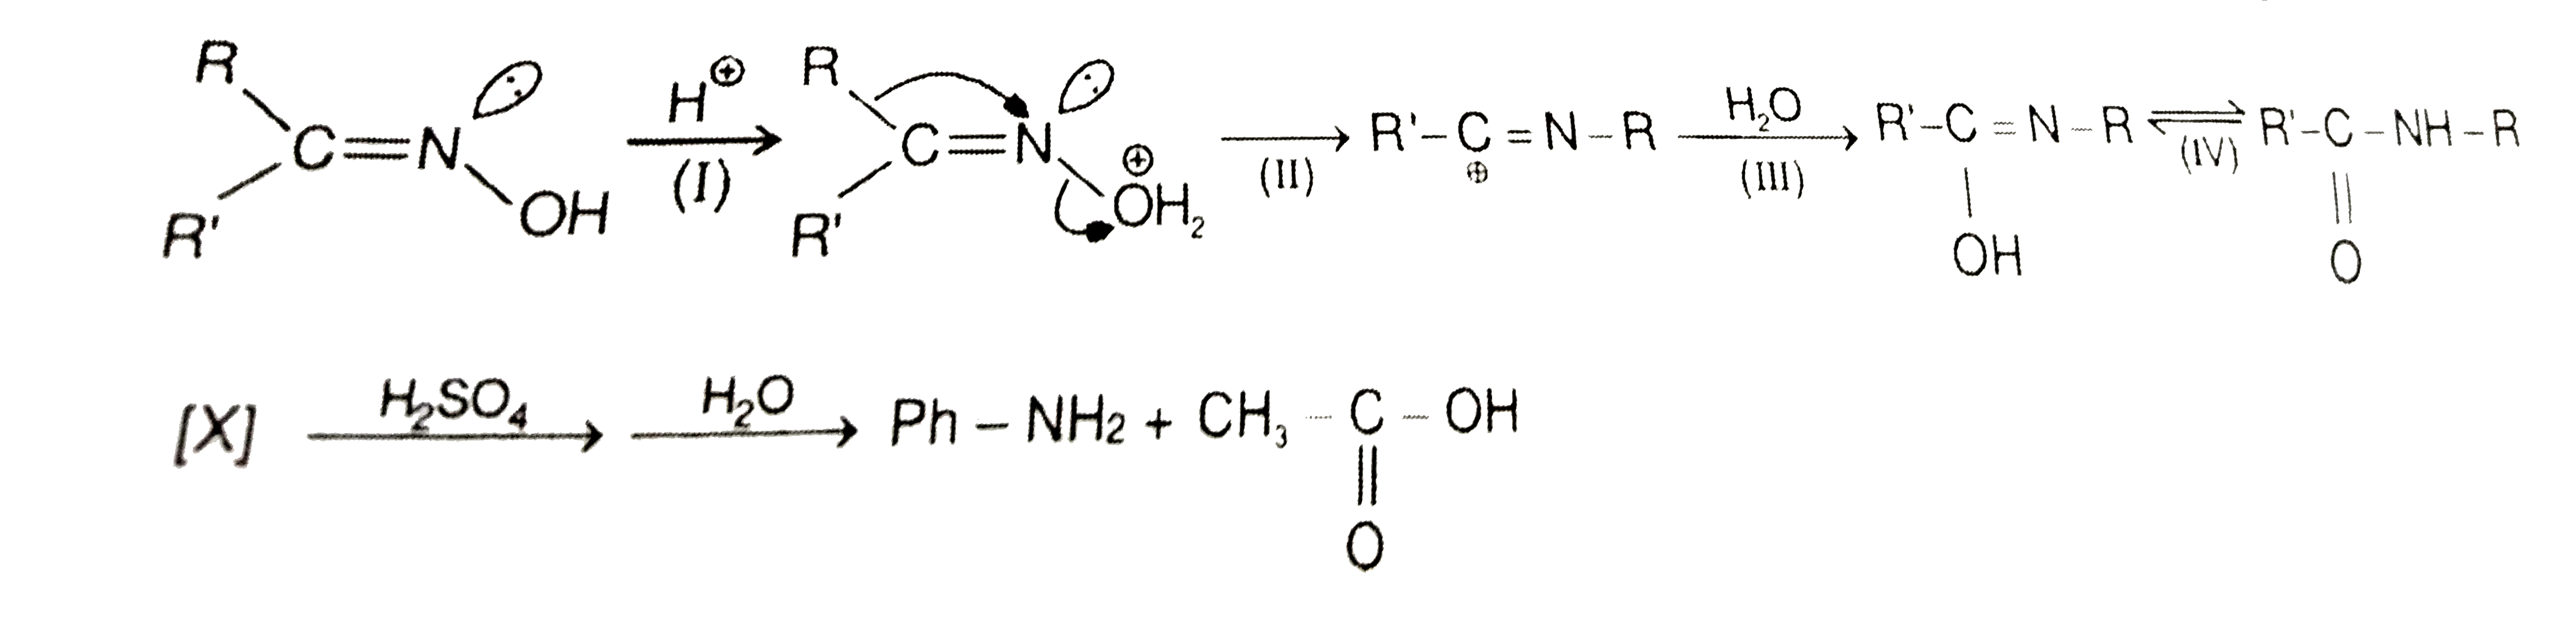 Alldehydes and Ketones react with NH(2)OH to form aldoximes and Ketoximes respectively. Configuration of these can be determined by Beckmann rearragement as that group migrates which is anti w.r.t -OH      Which step is Rate determening step ?